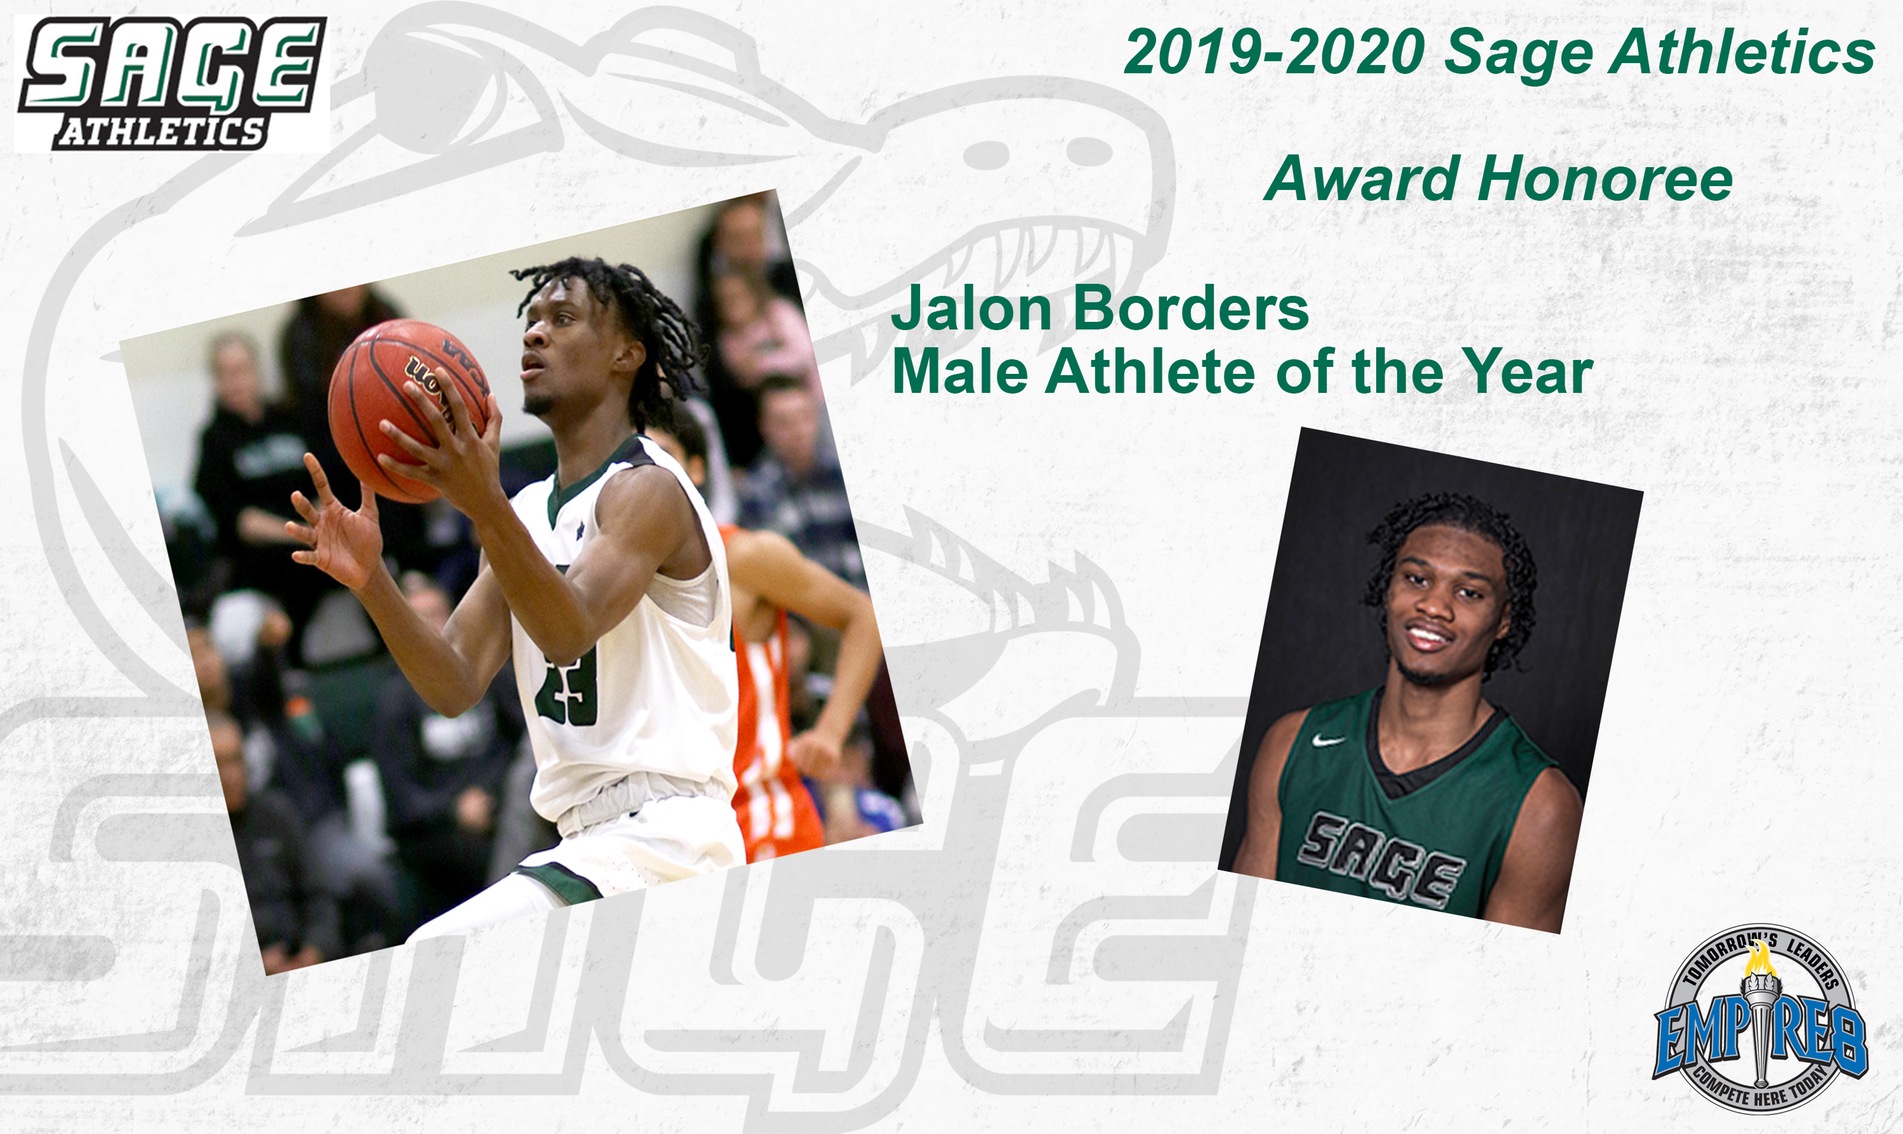 Jalon Borders honored as 2019-2020 Sage Male Athlete of the Year